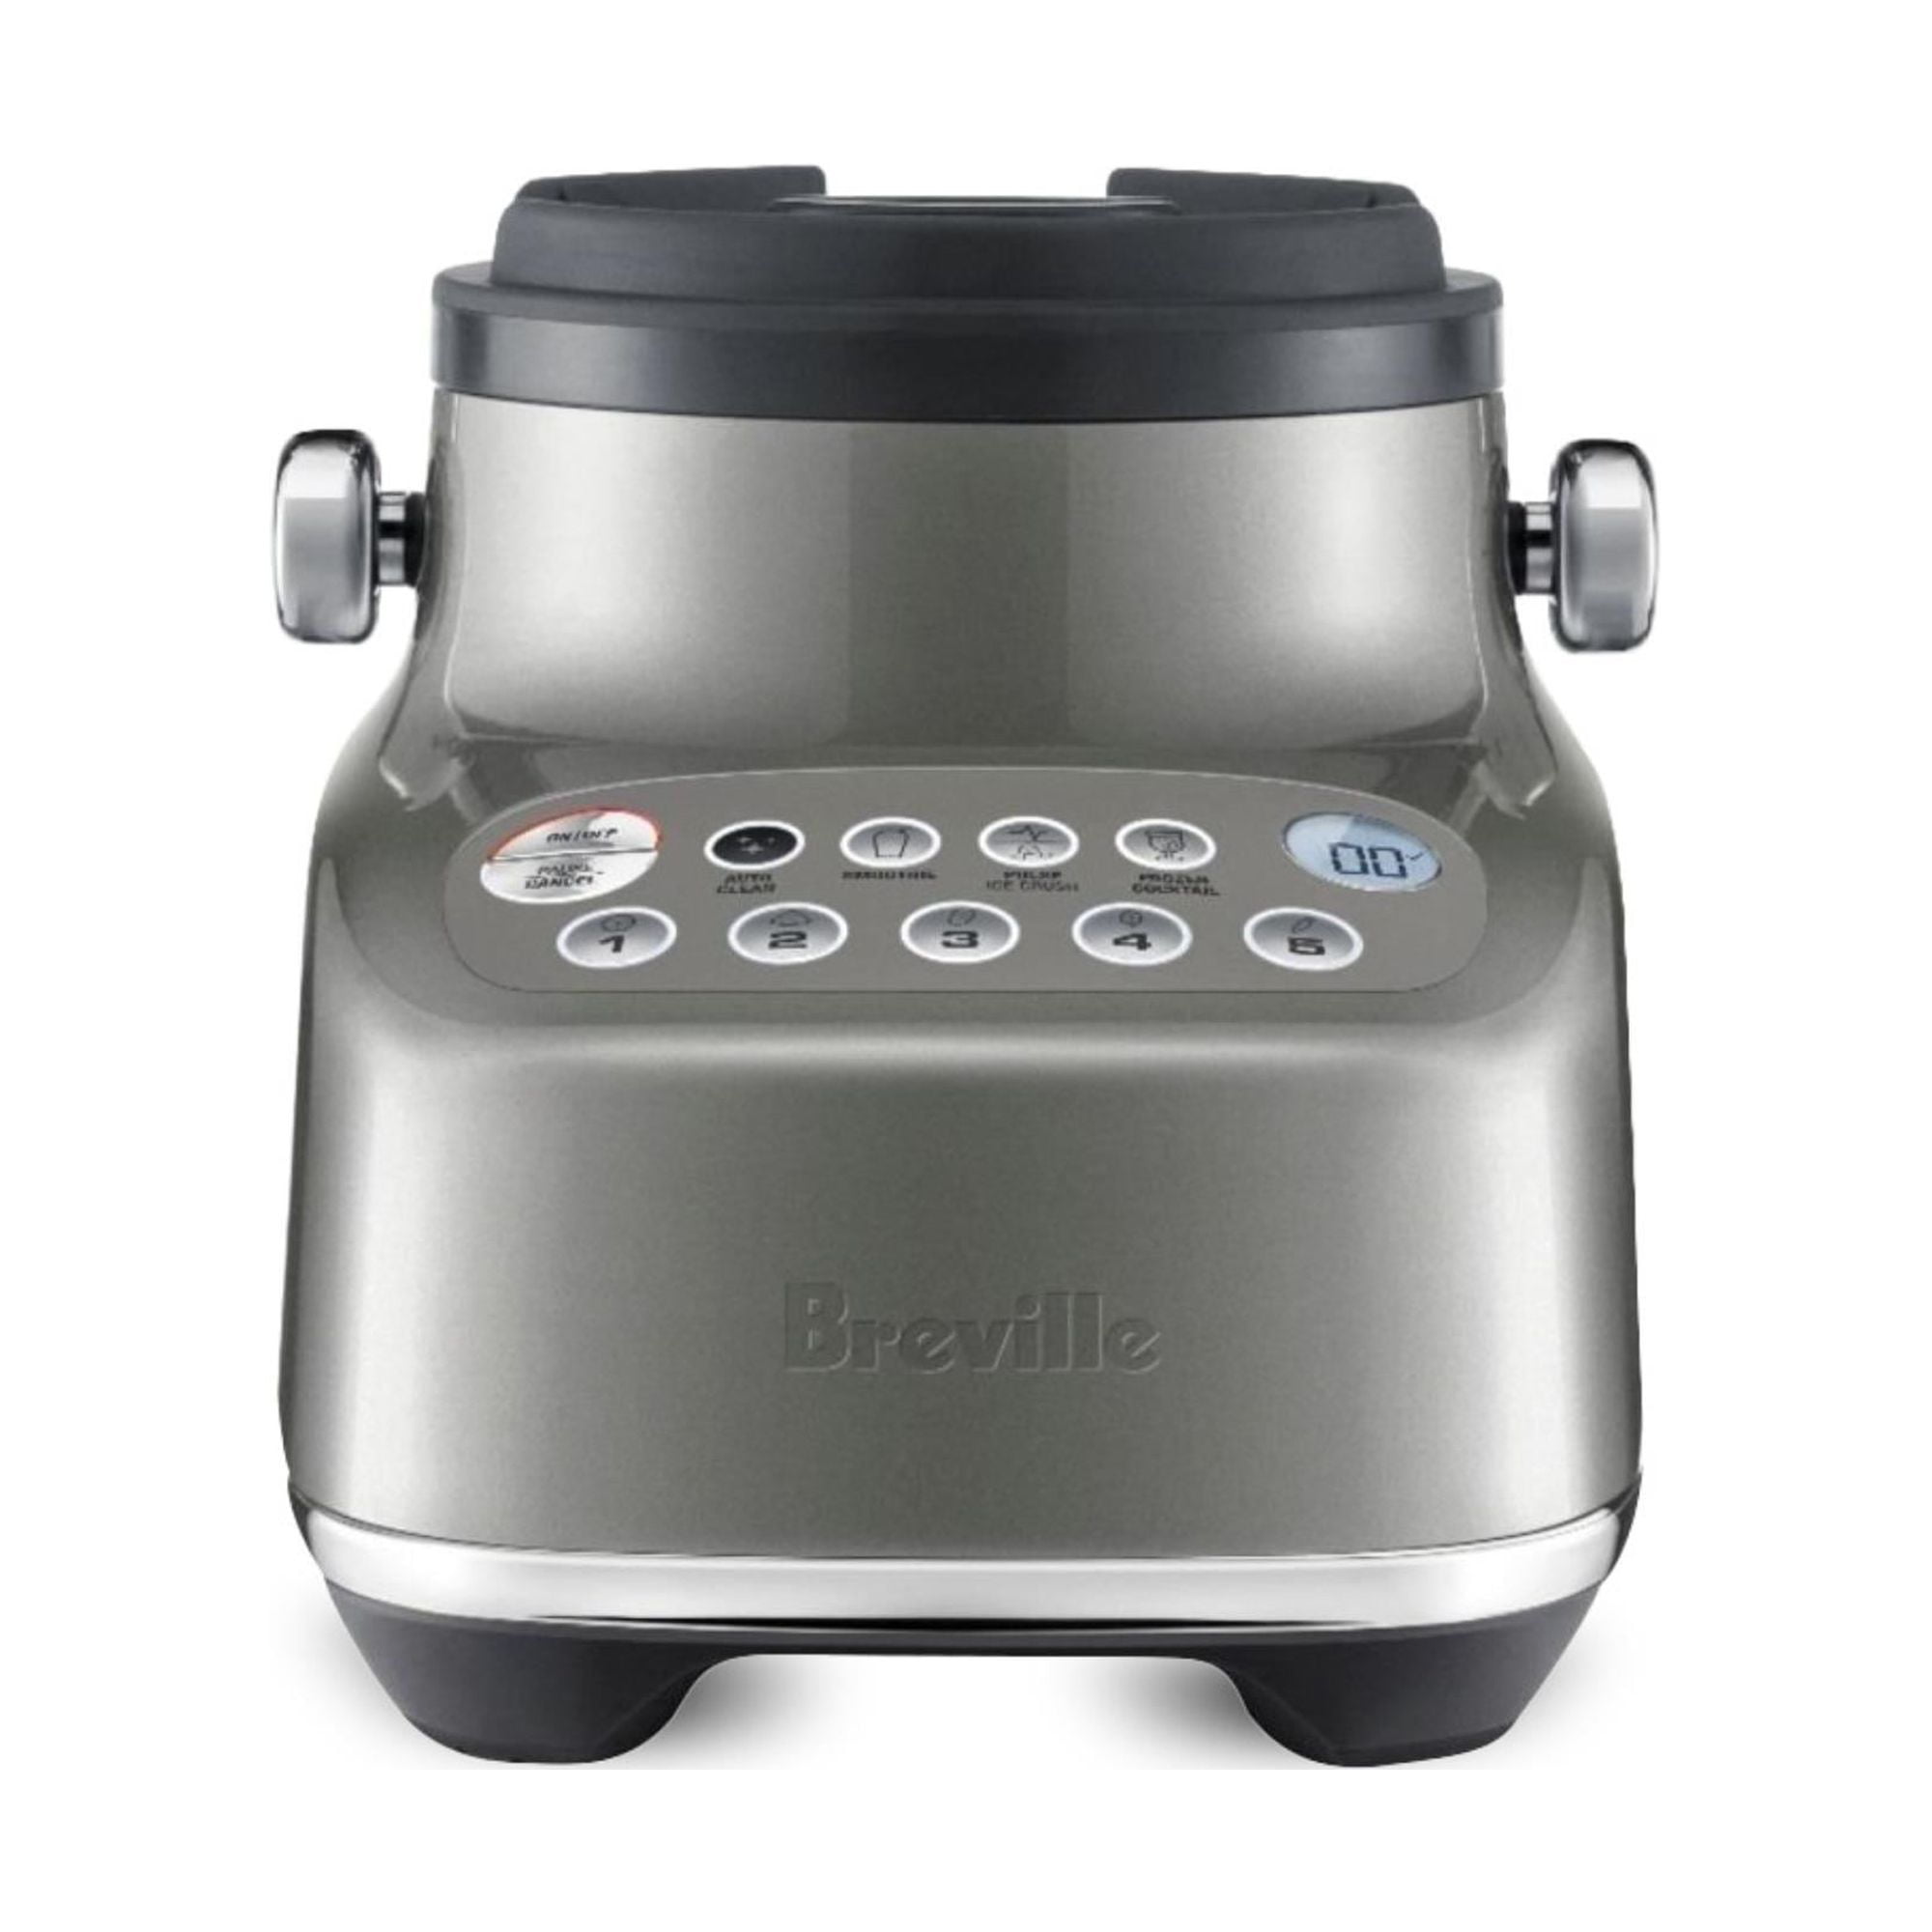 Breville 3X Bluicer Blender Juicer, Multi-Purpose, Smoked Hickory on Food52